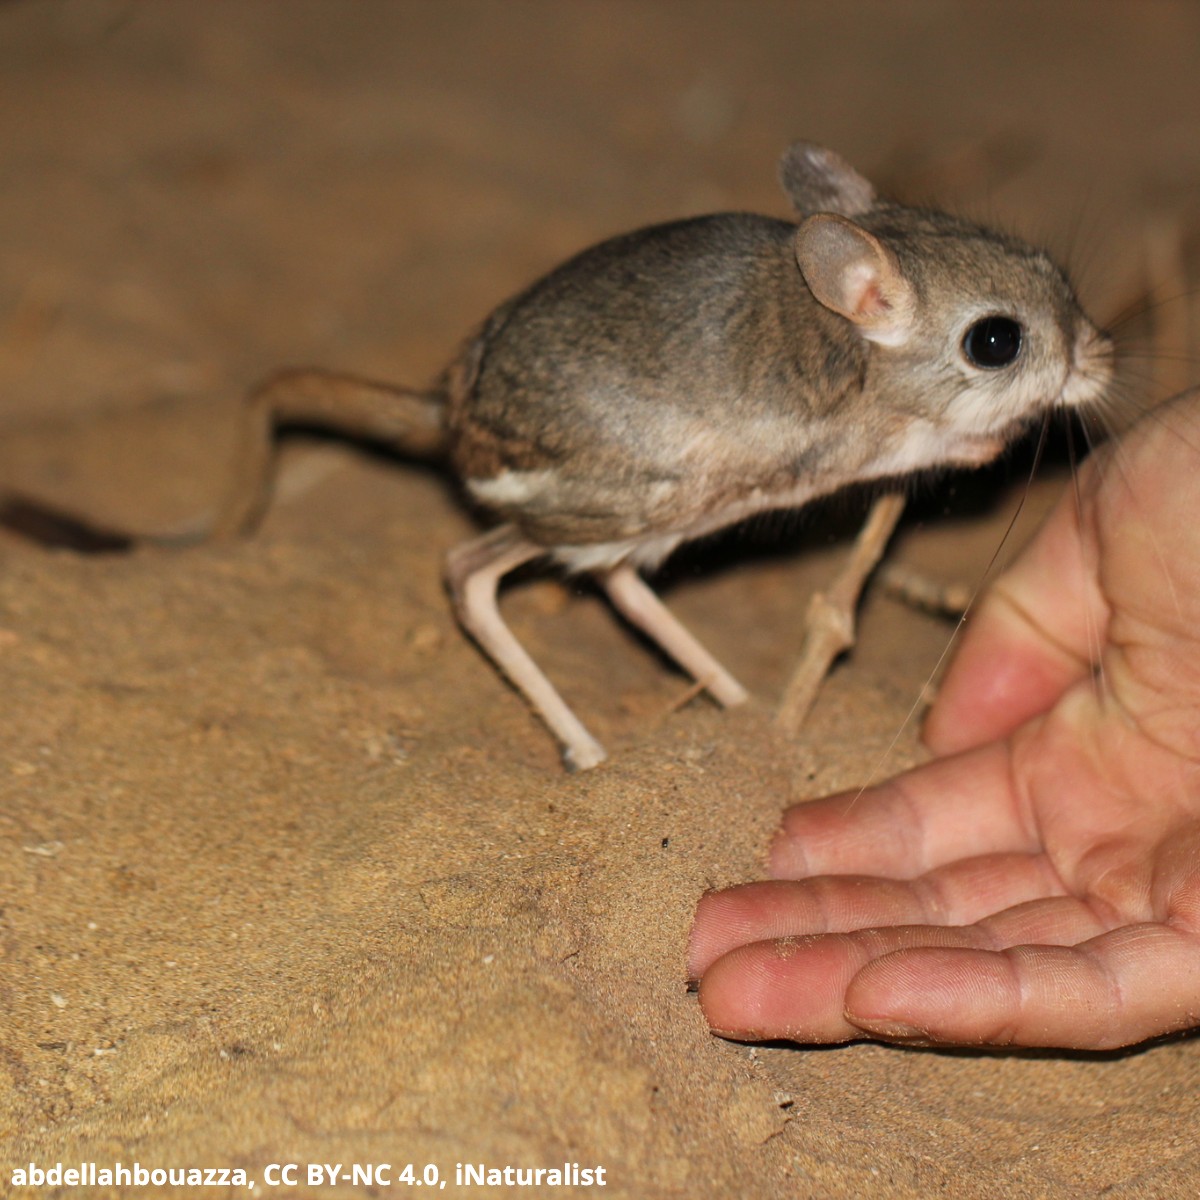 Hippity hoppity, have you ever seen the lesser Egyptian jerboa? 🤔 Found in parts of Asia & Africa, this tiny desert-dweller hops like a kangaroo across the sand, traveling long distances by night. It can journey ~6.2 mi (10 km) away from home in search of food.